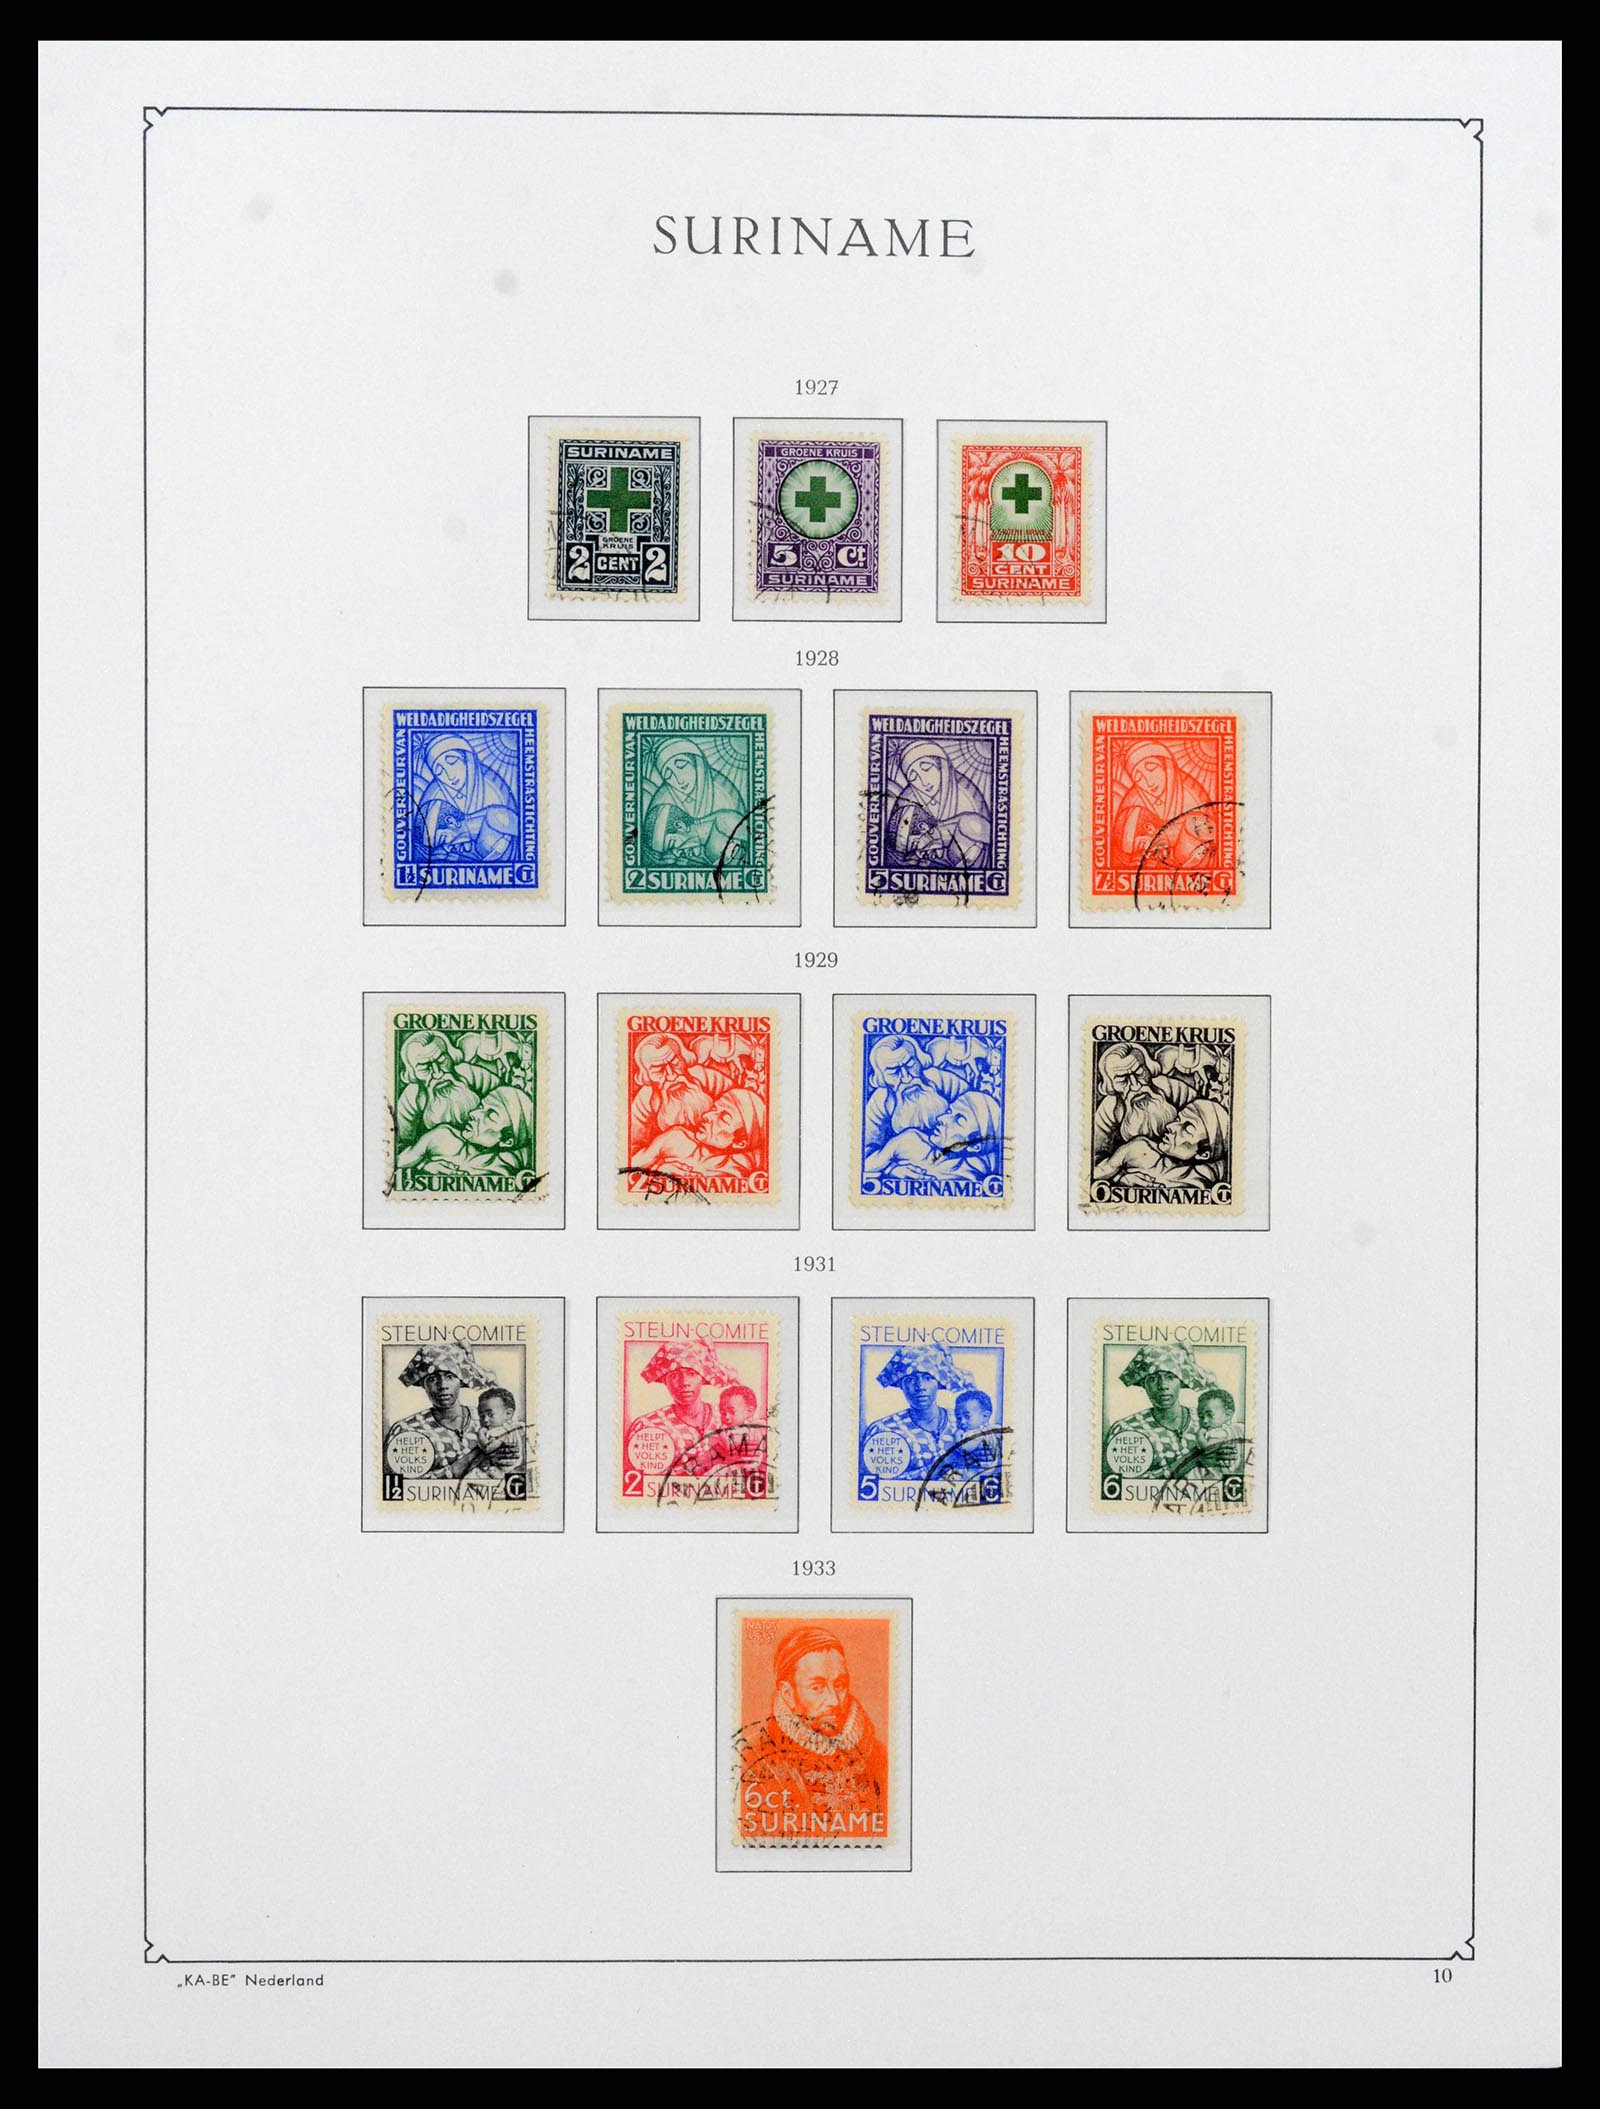 38465 0010 - Stamp collection 38465 Suriname 1873-1975.